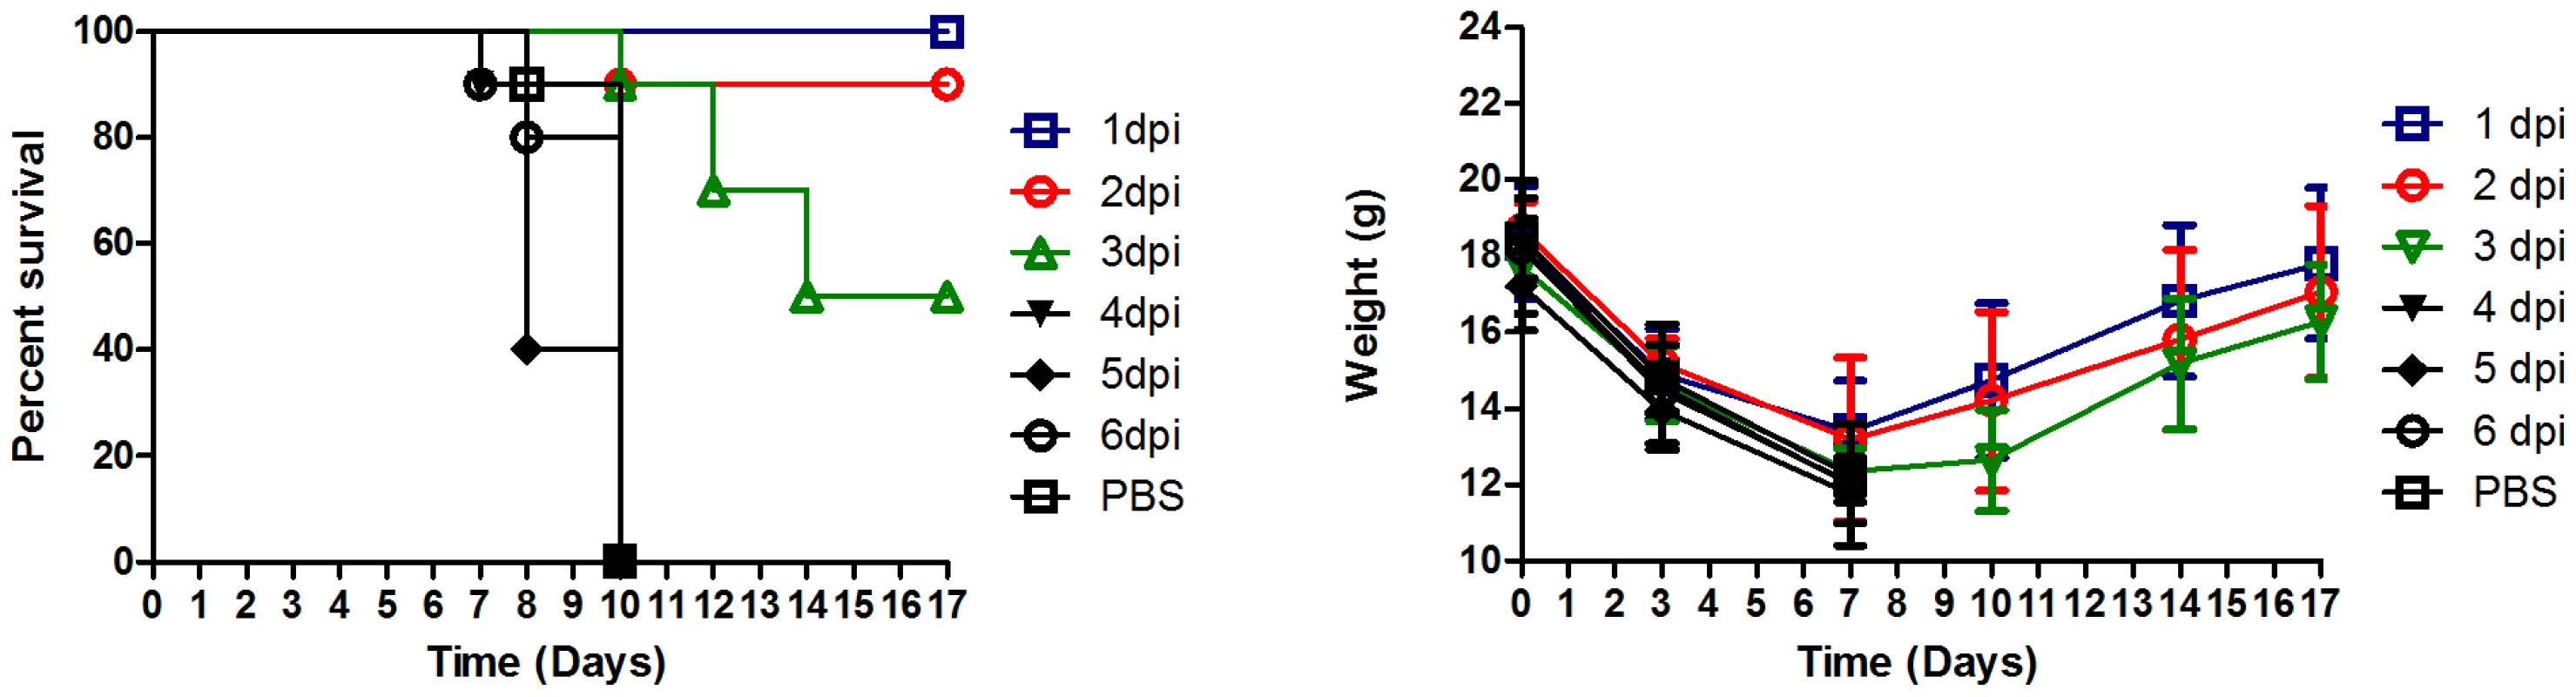 Antibody A06 therapy protects Balb/C mice from death by 2009 pandemic H1N1 influenza infection.